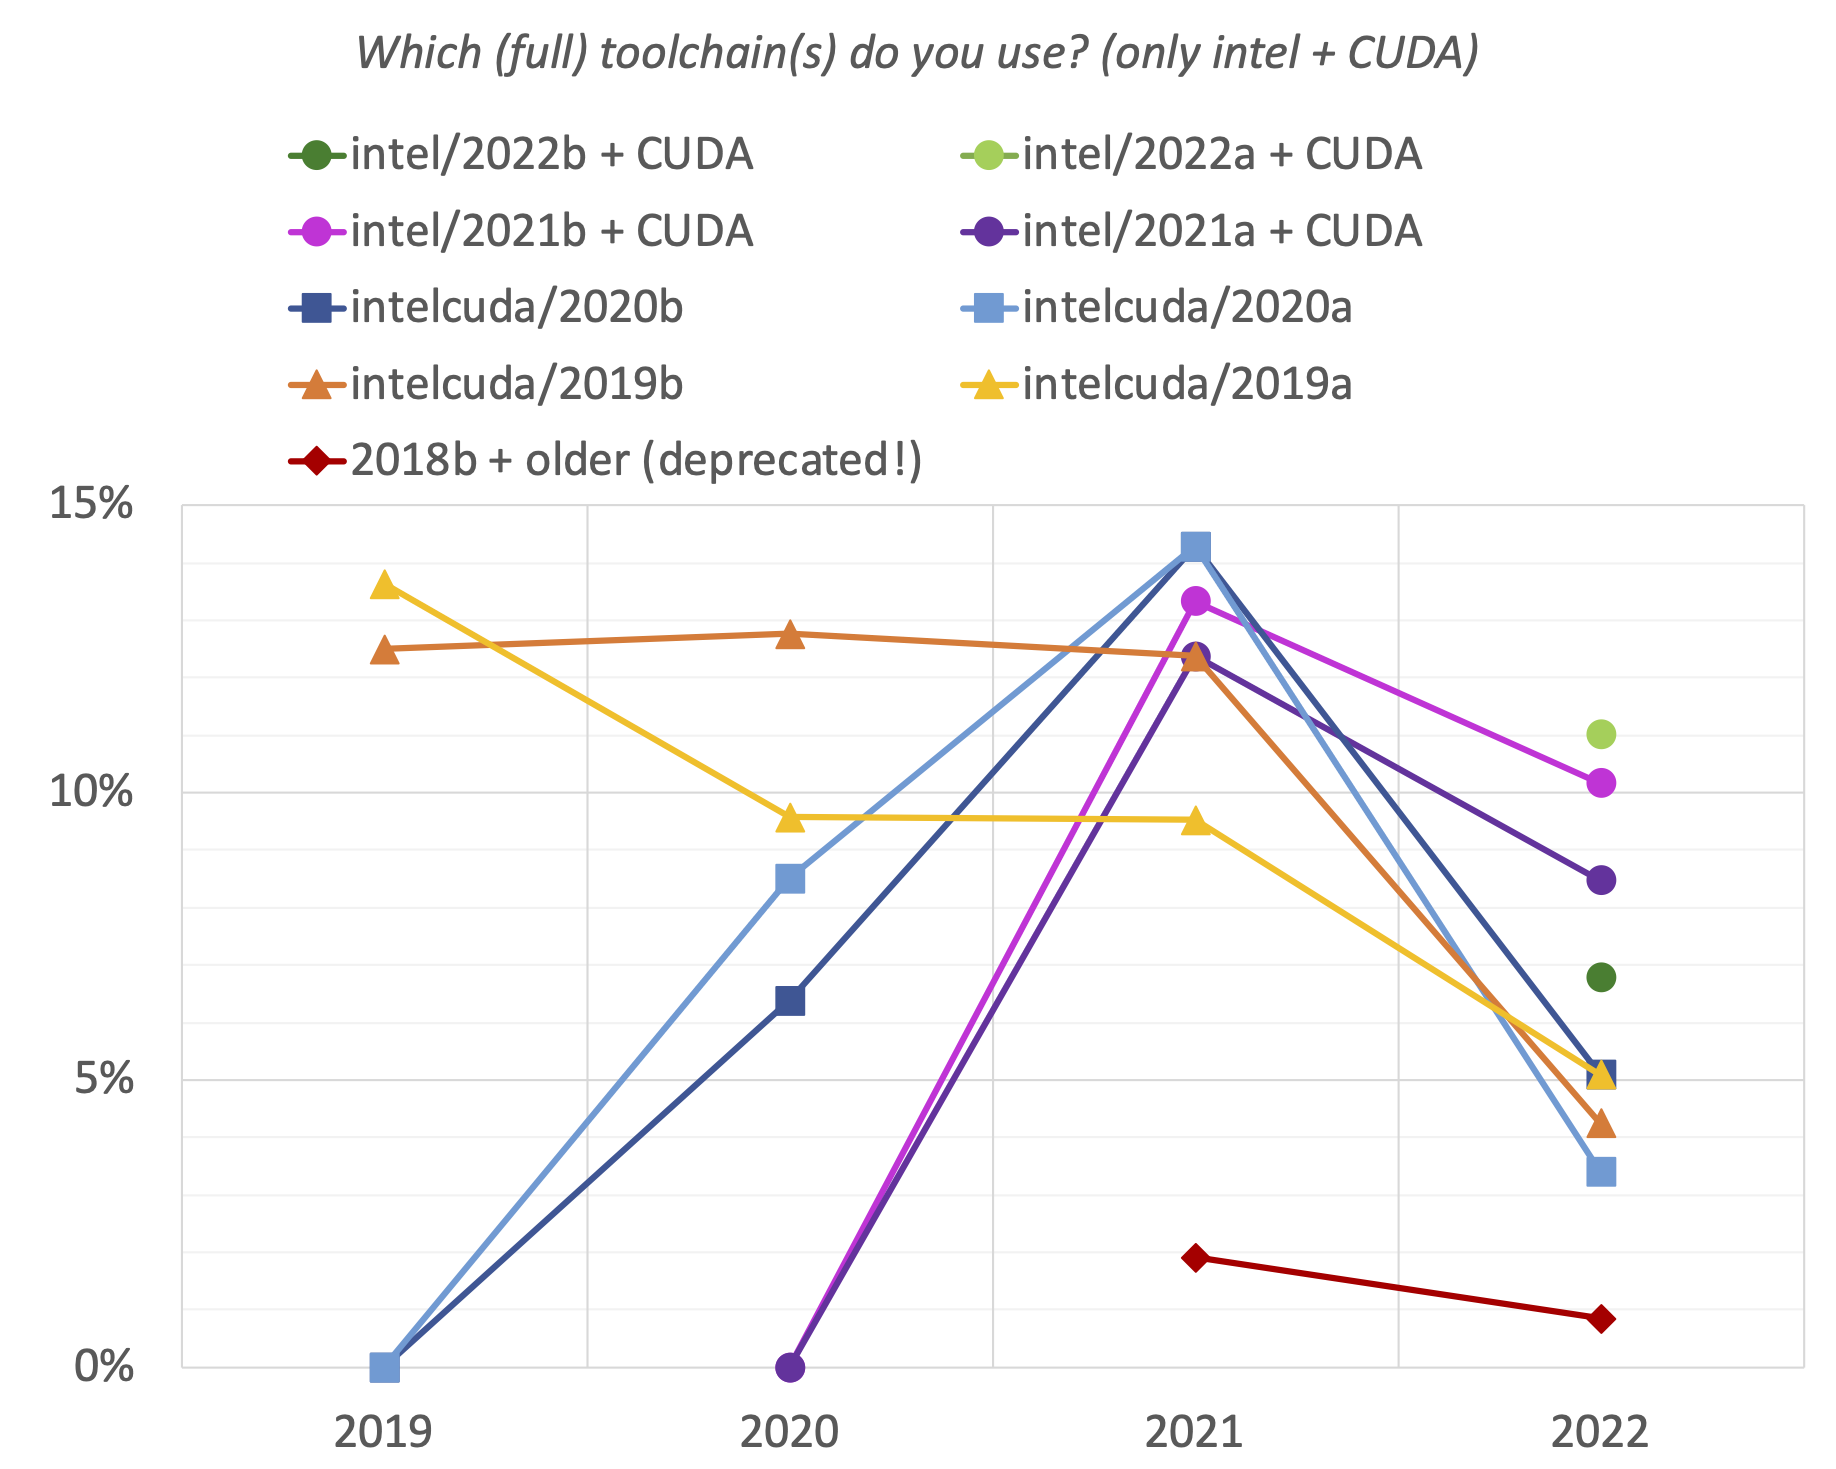 20. Which (full) toolchain(s) do you use? (only intel + CUDA)